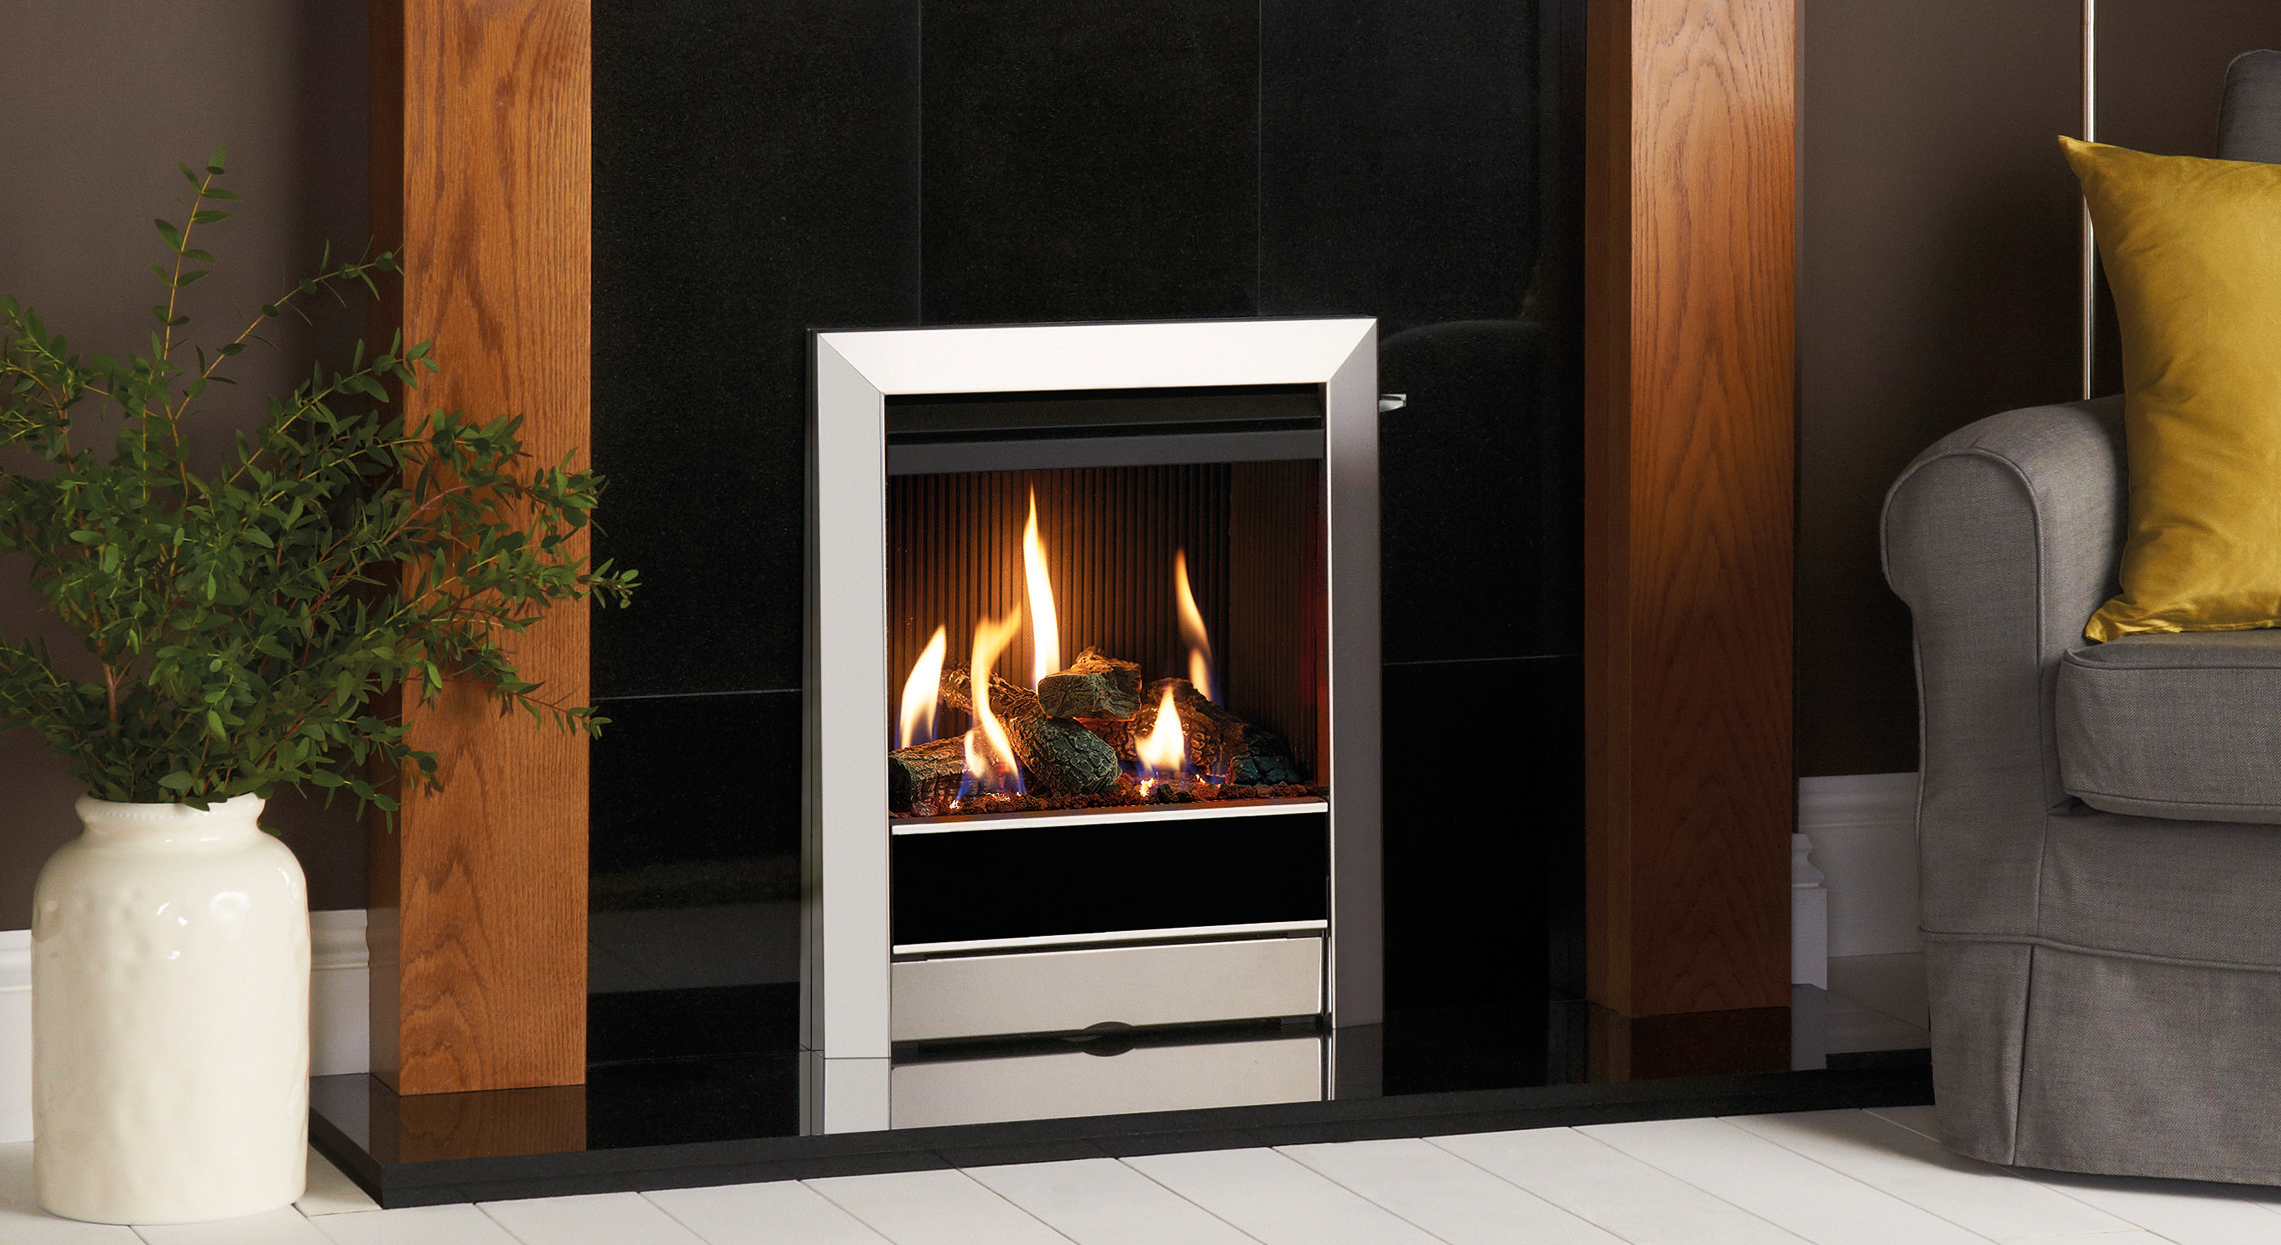 Gazco Logic™ HE Conventional flue fire with Log-effect fuel bed and Tempo front in a Brushed Stainless finish.